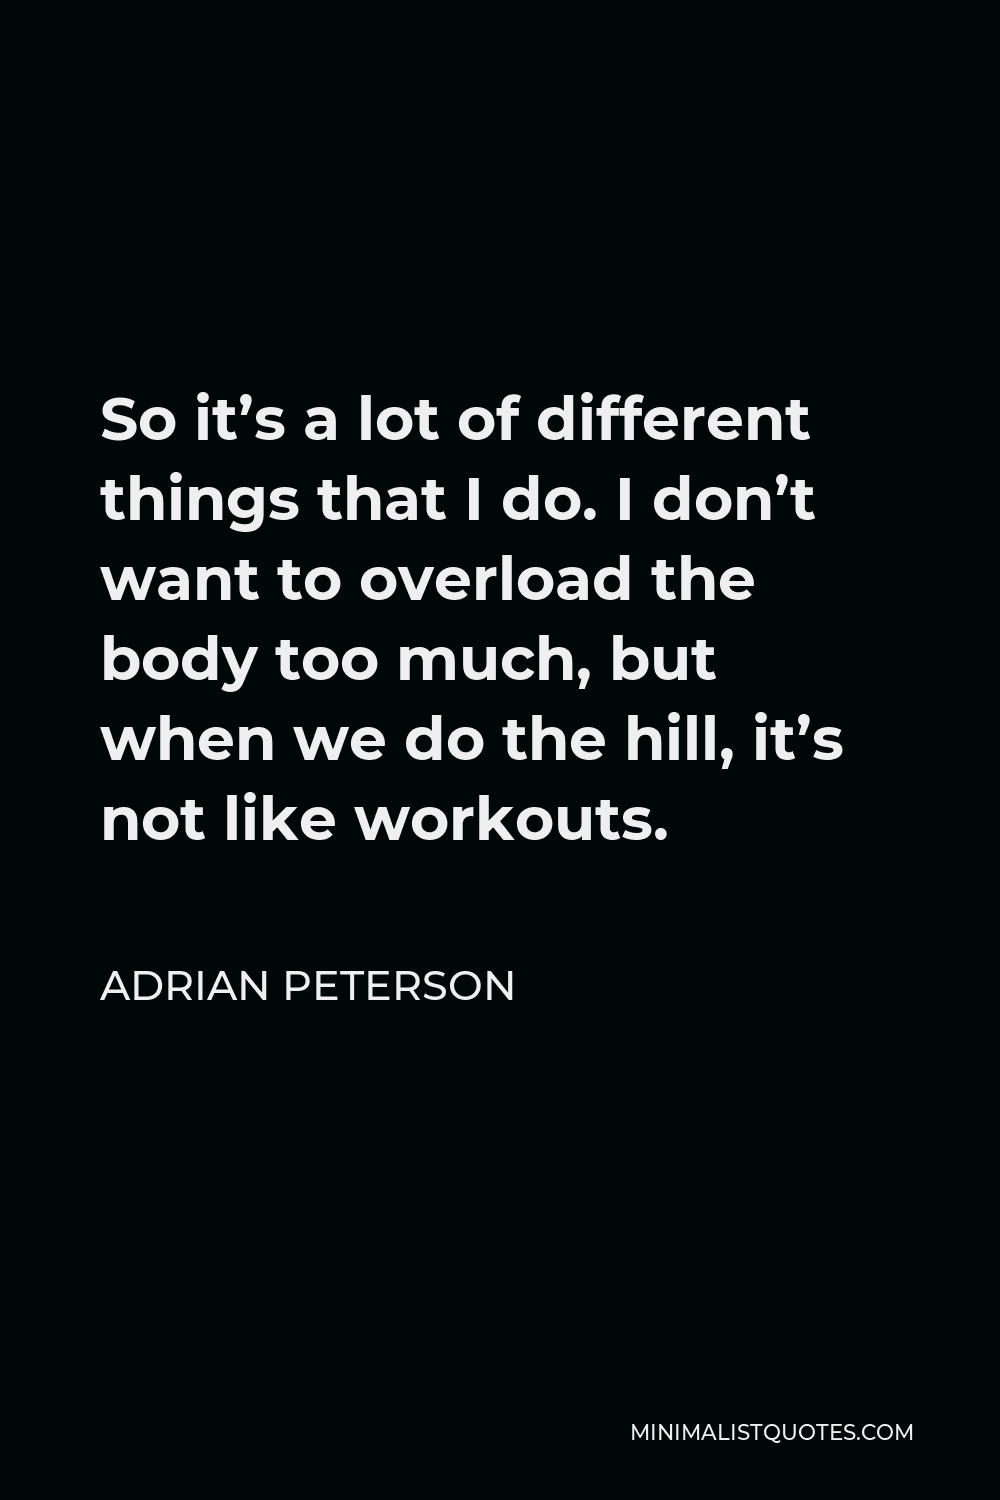 Adrian Peterson Quote - So it’s a lot of different things that I do. I don’t want to overload the body too much, but when we do the hill, it’s not like workouts.